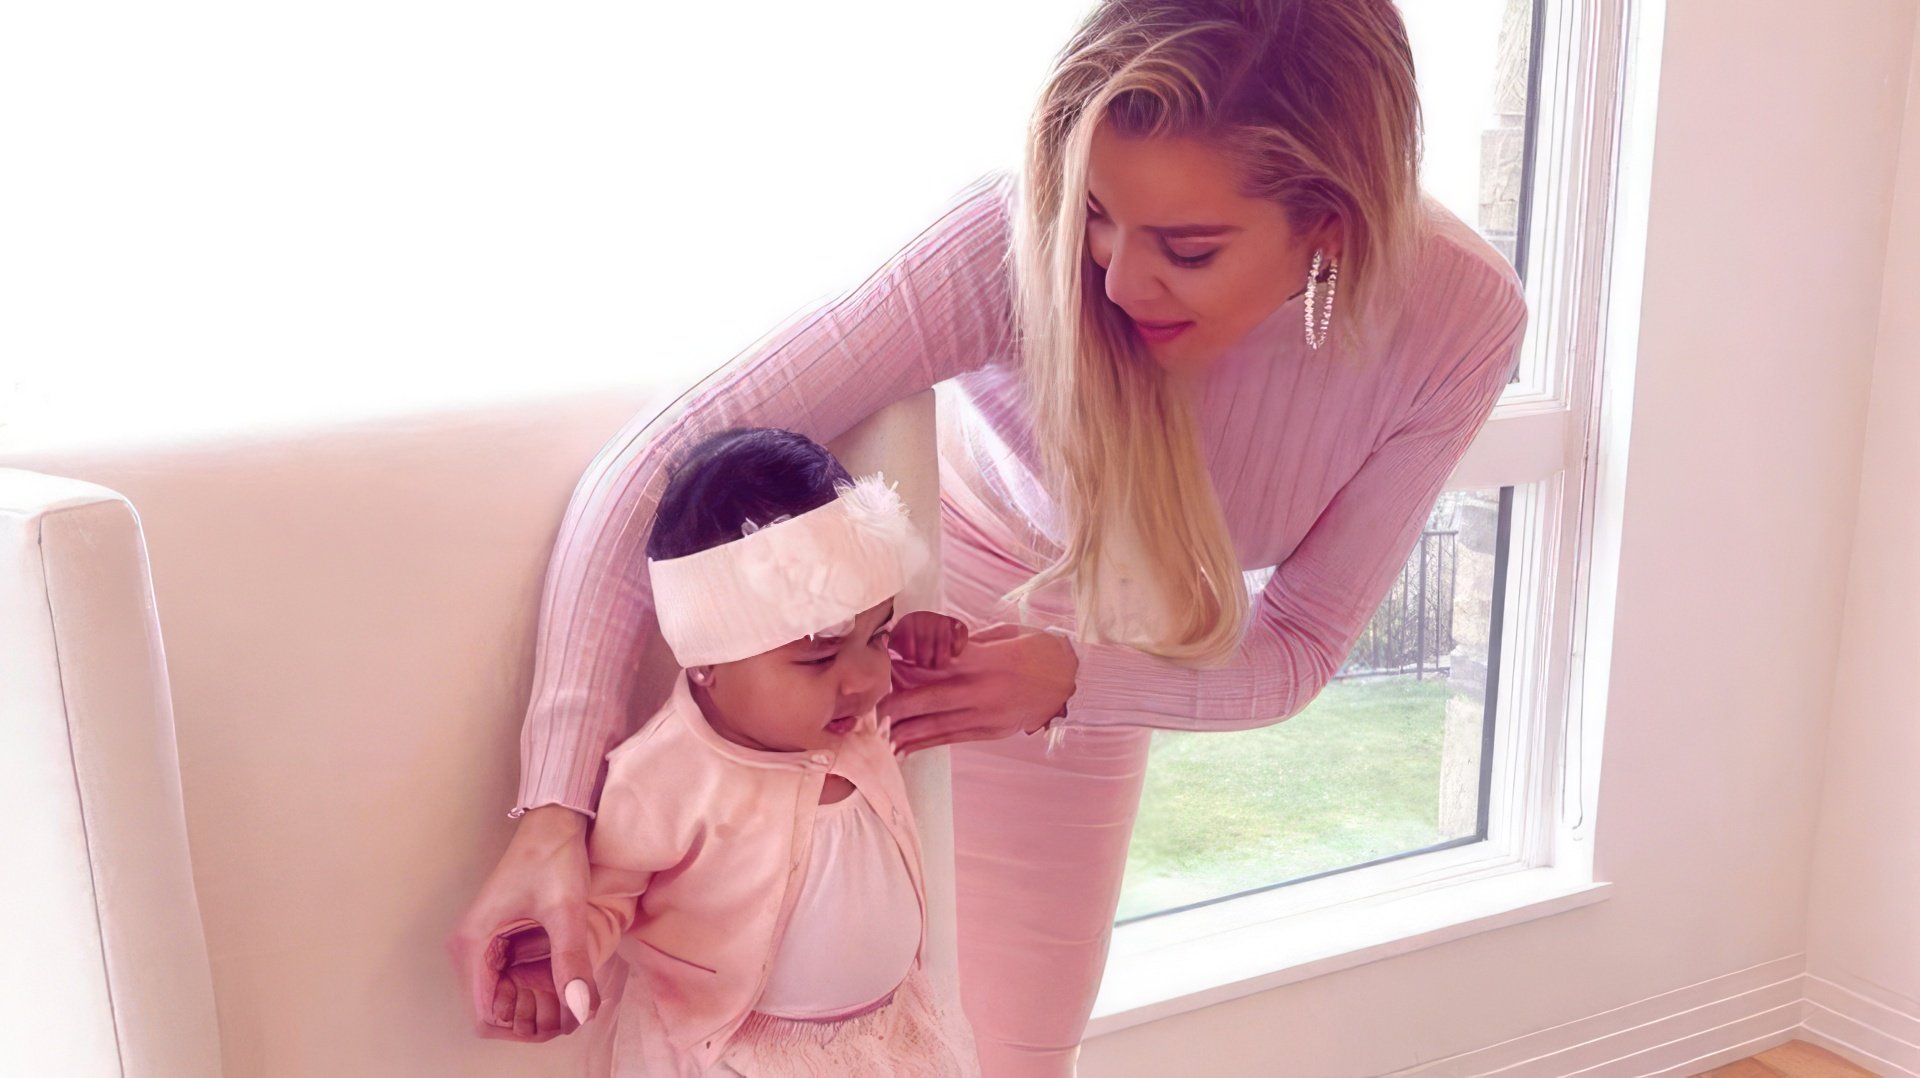 Khloé Kardashian with her baby daughter